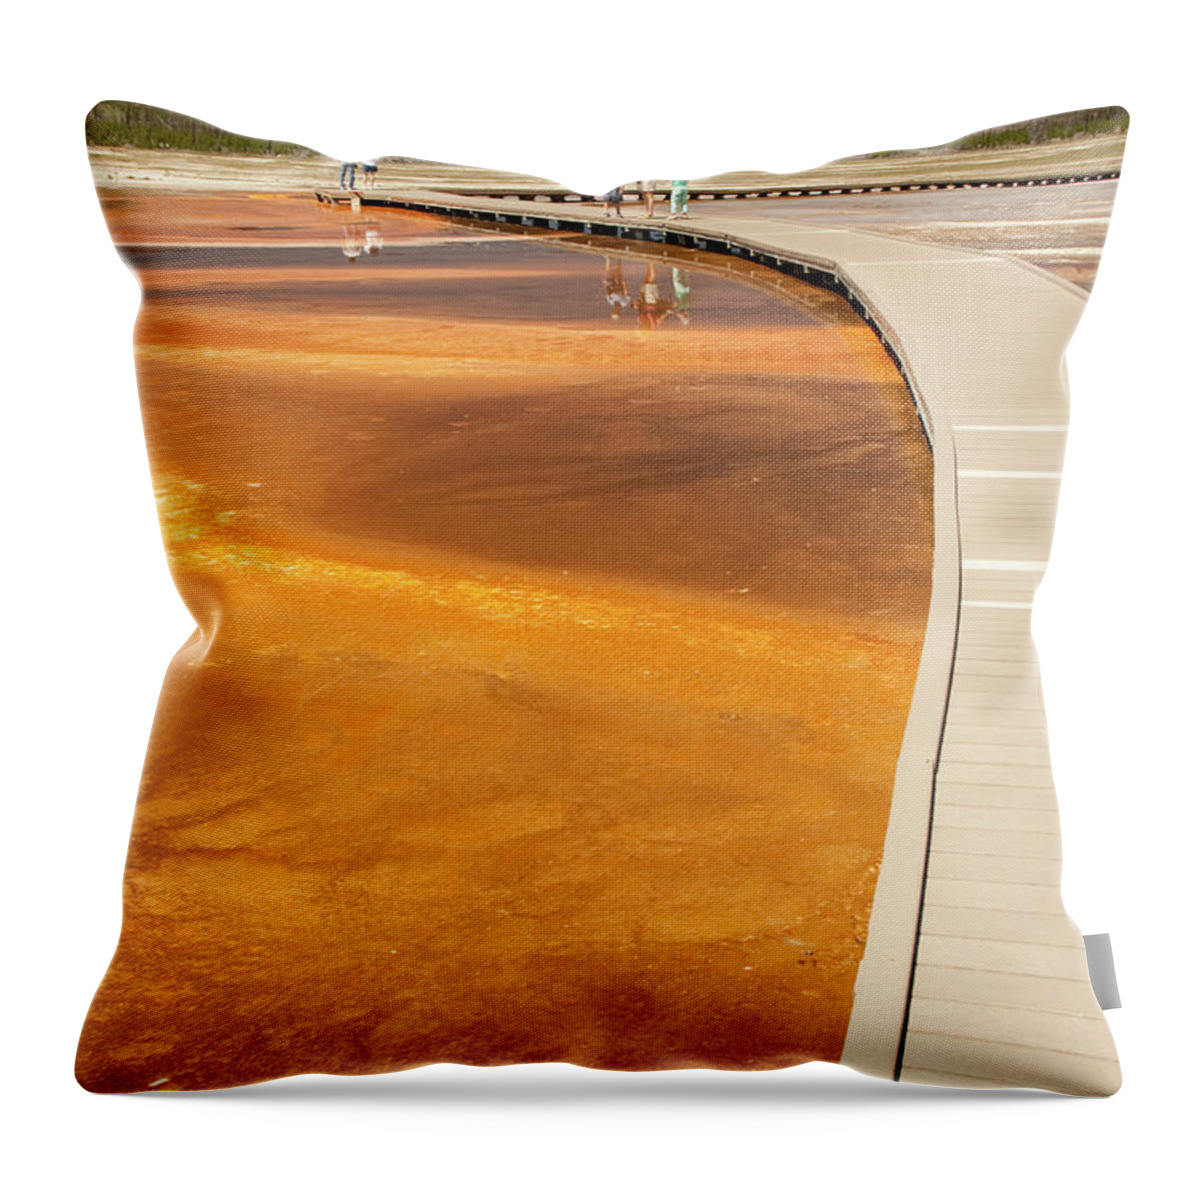 People Throw Pillow featuring the photograph Tourists On Boadwalk Over Great by John & Lisa Merrill